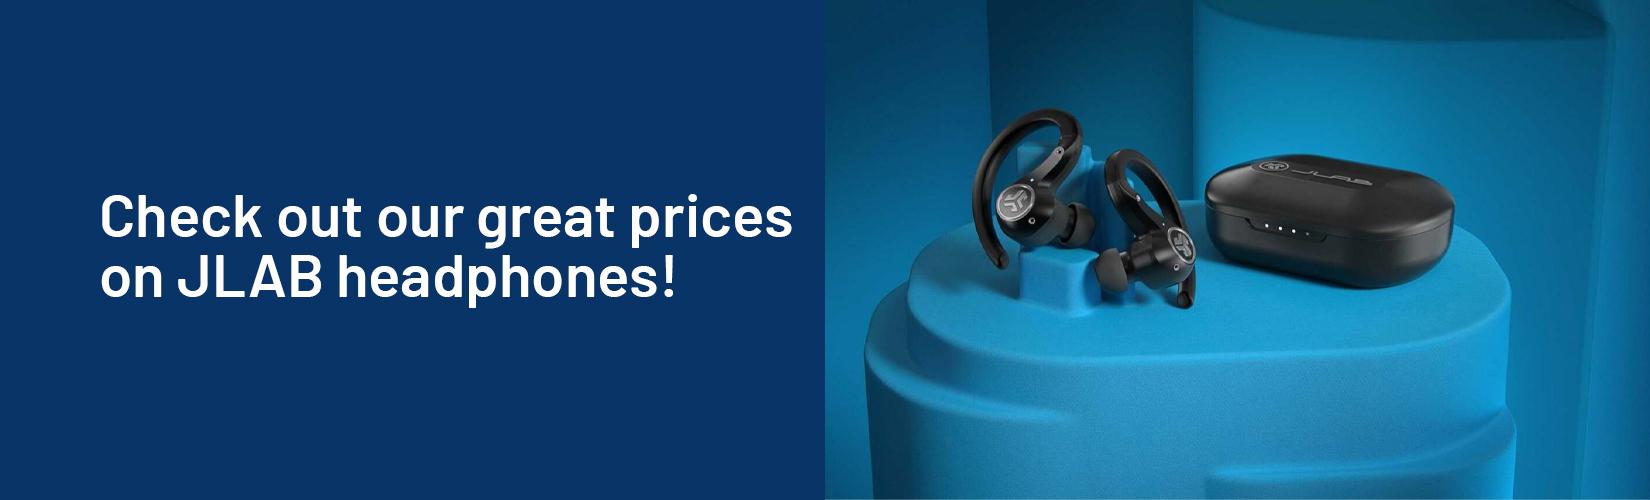 Check out our great prices on JLAB headphones!